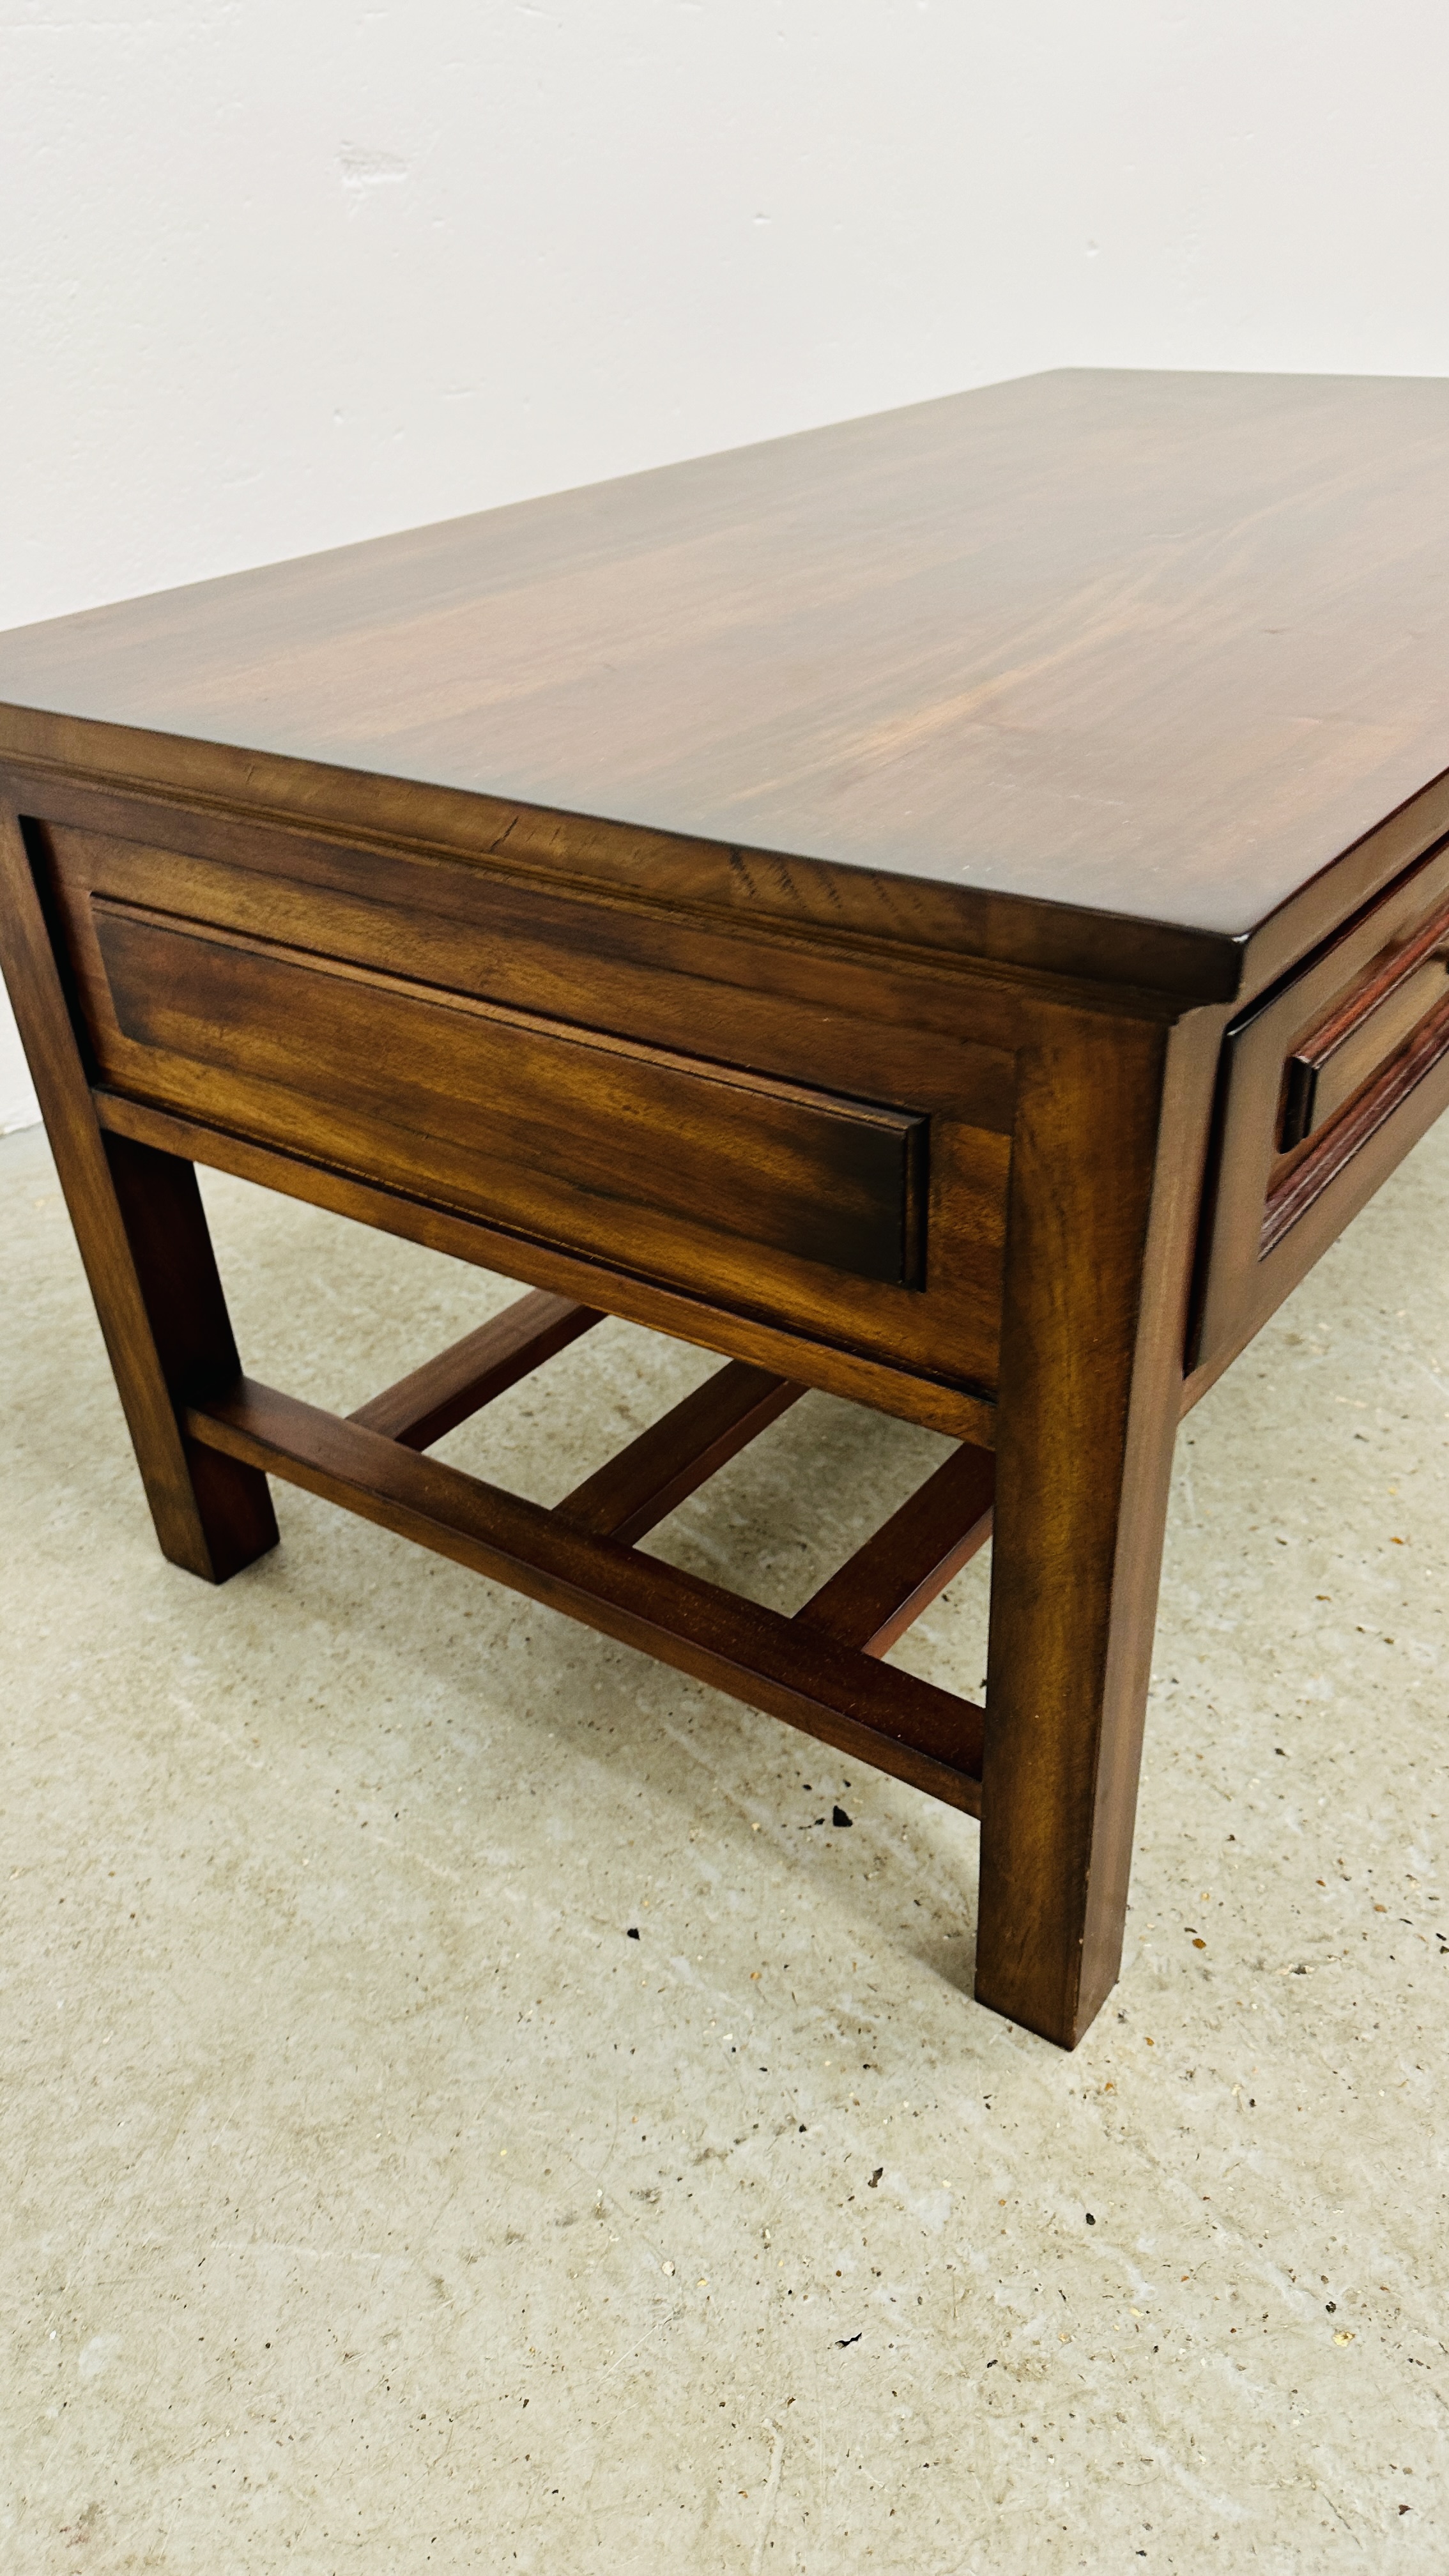 A DARK WOOD TWO DRAWER RECTANGULAR COFFEE TABLE - 110CM X 60CM. - Image 8 of 9